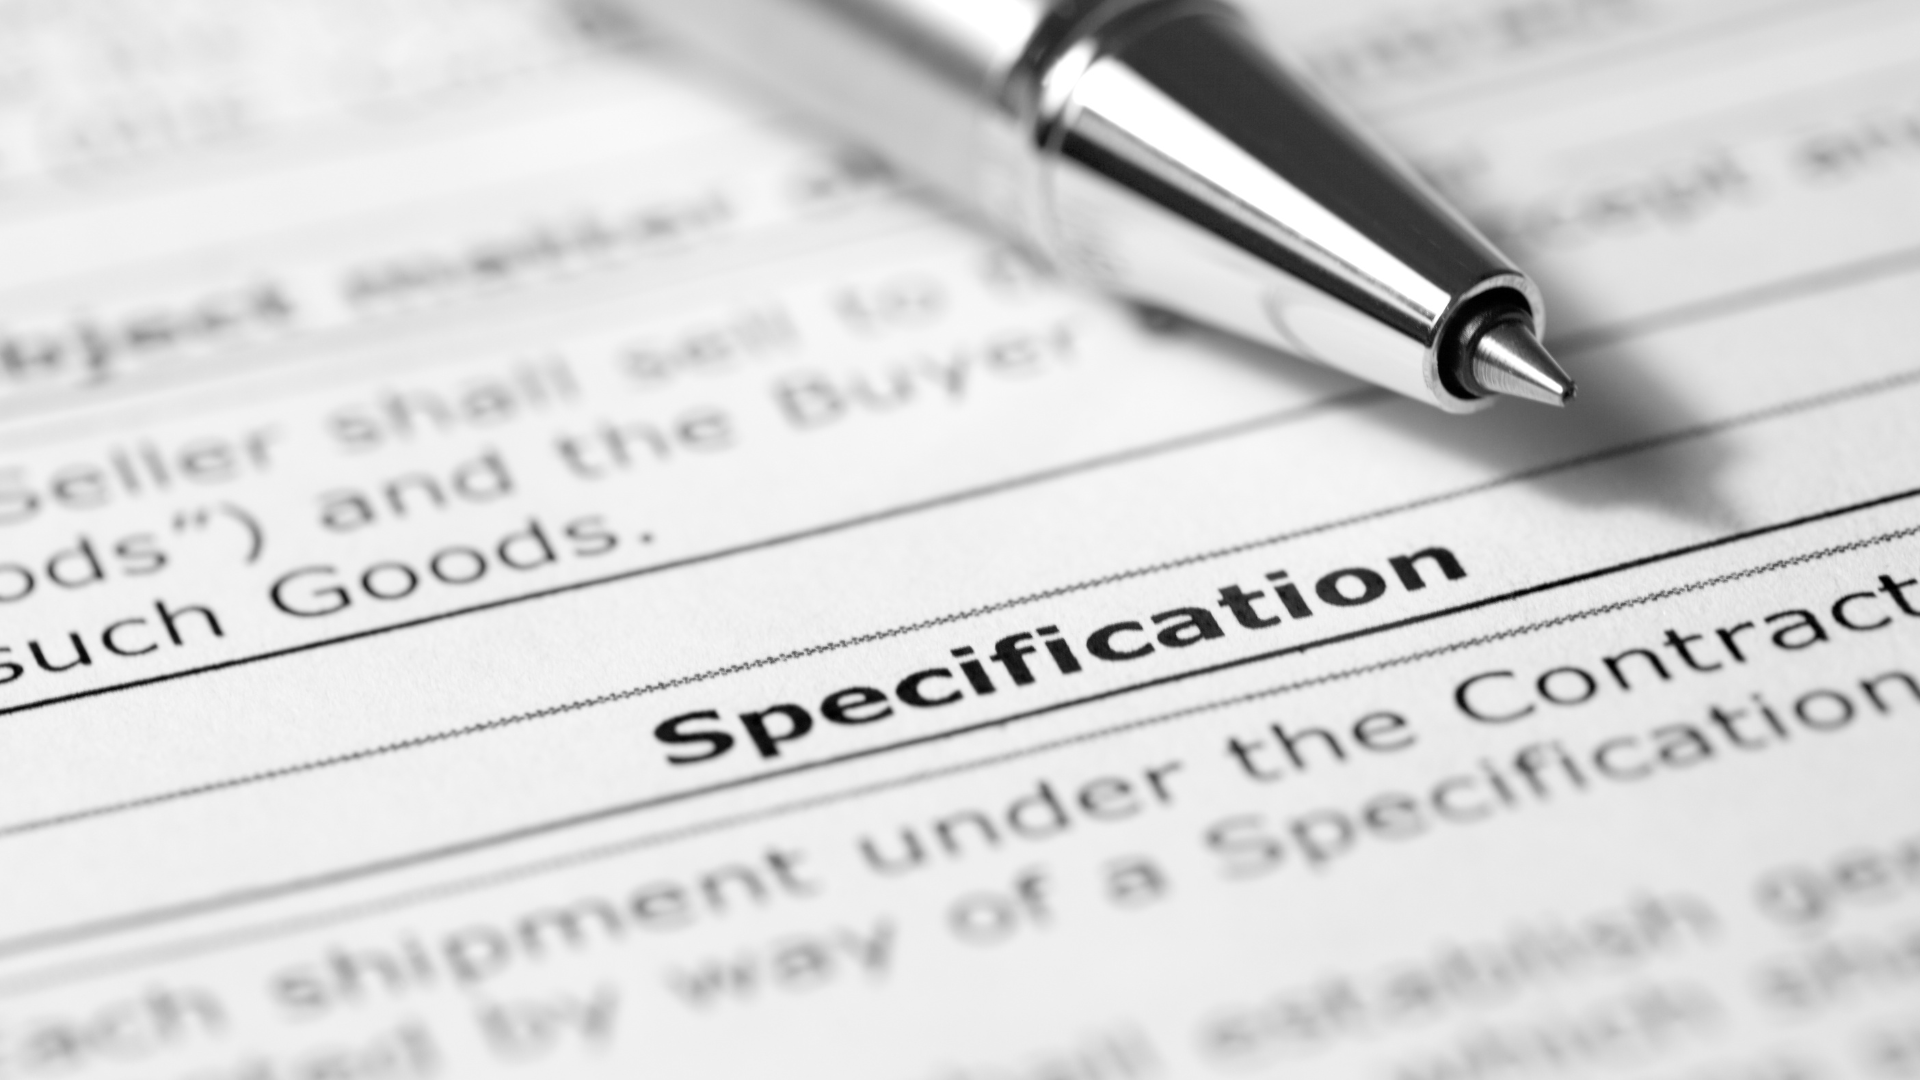 Contract specifications